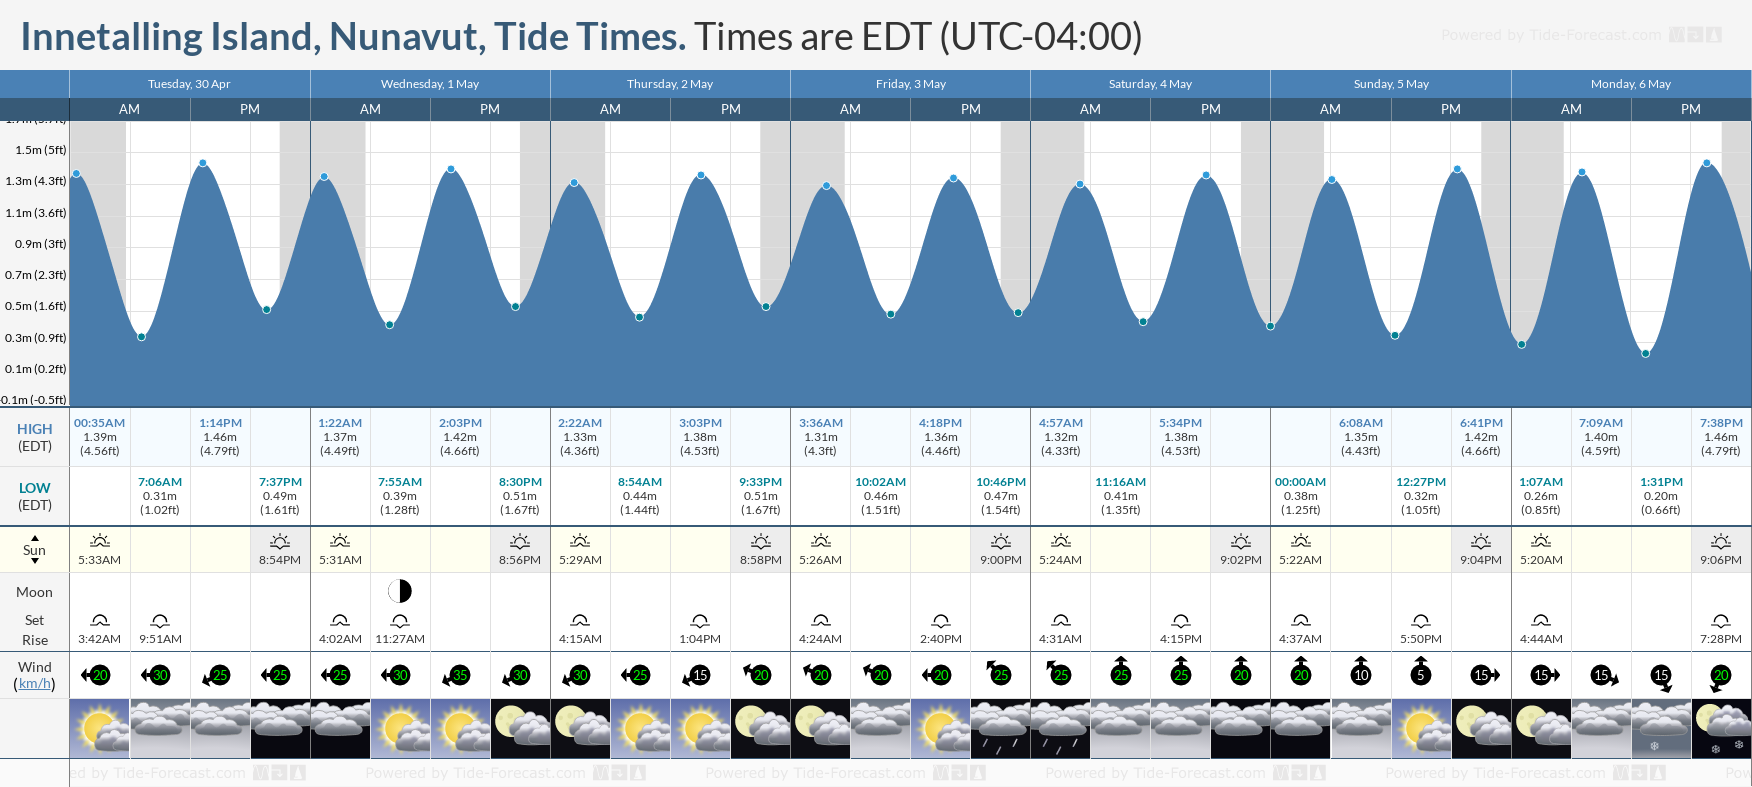 Innetalling Island, Nunavut Tide Chart including high and low tide tide times for the next 7 days